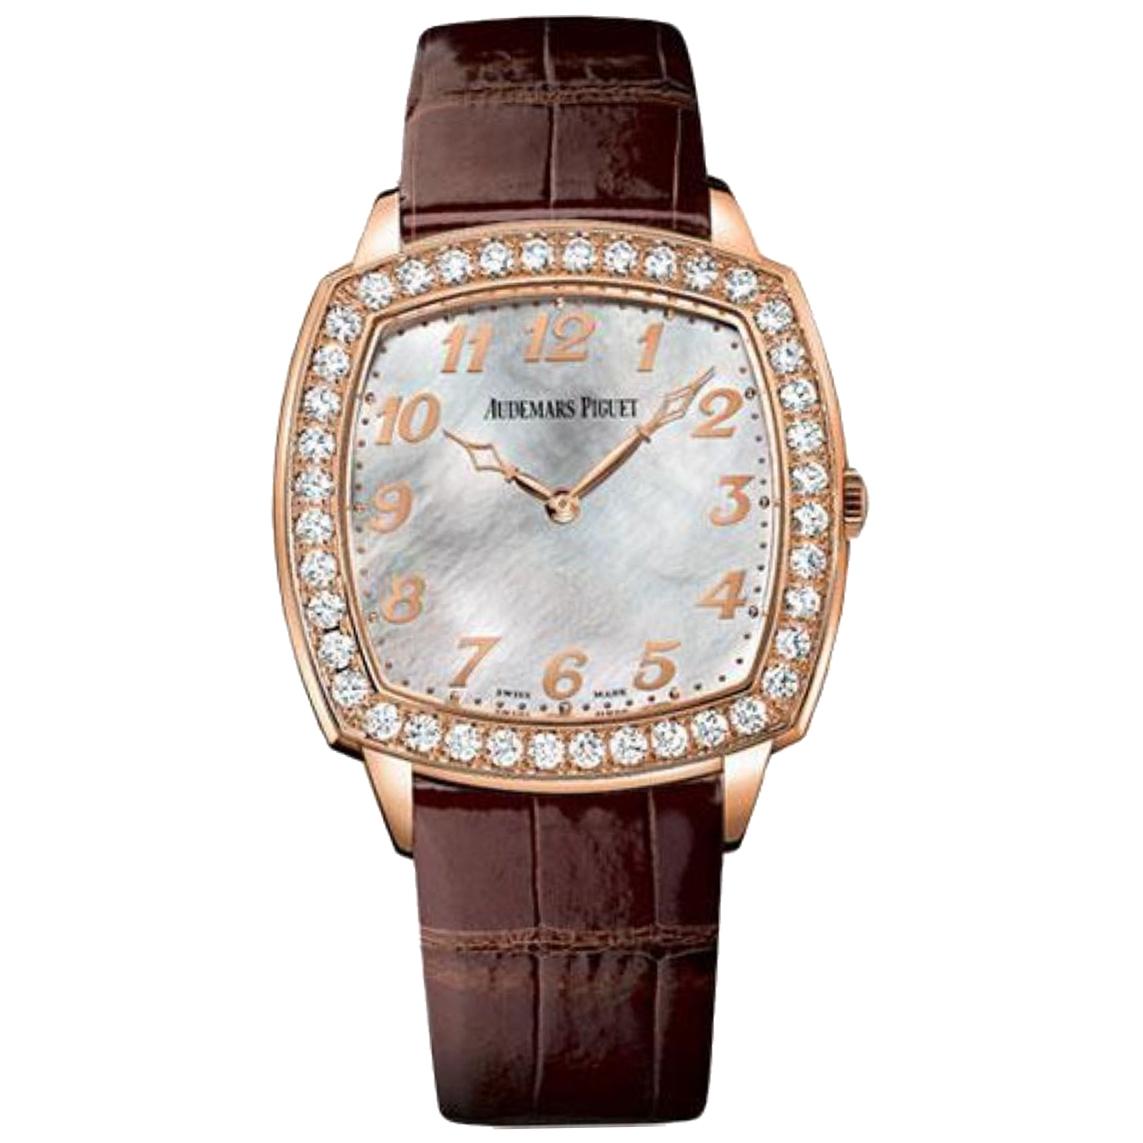 Audemars Piguet Tradition Pink Gold Watch-15337OR.ZZ.A810CR.01 For Sale